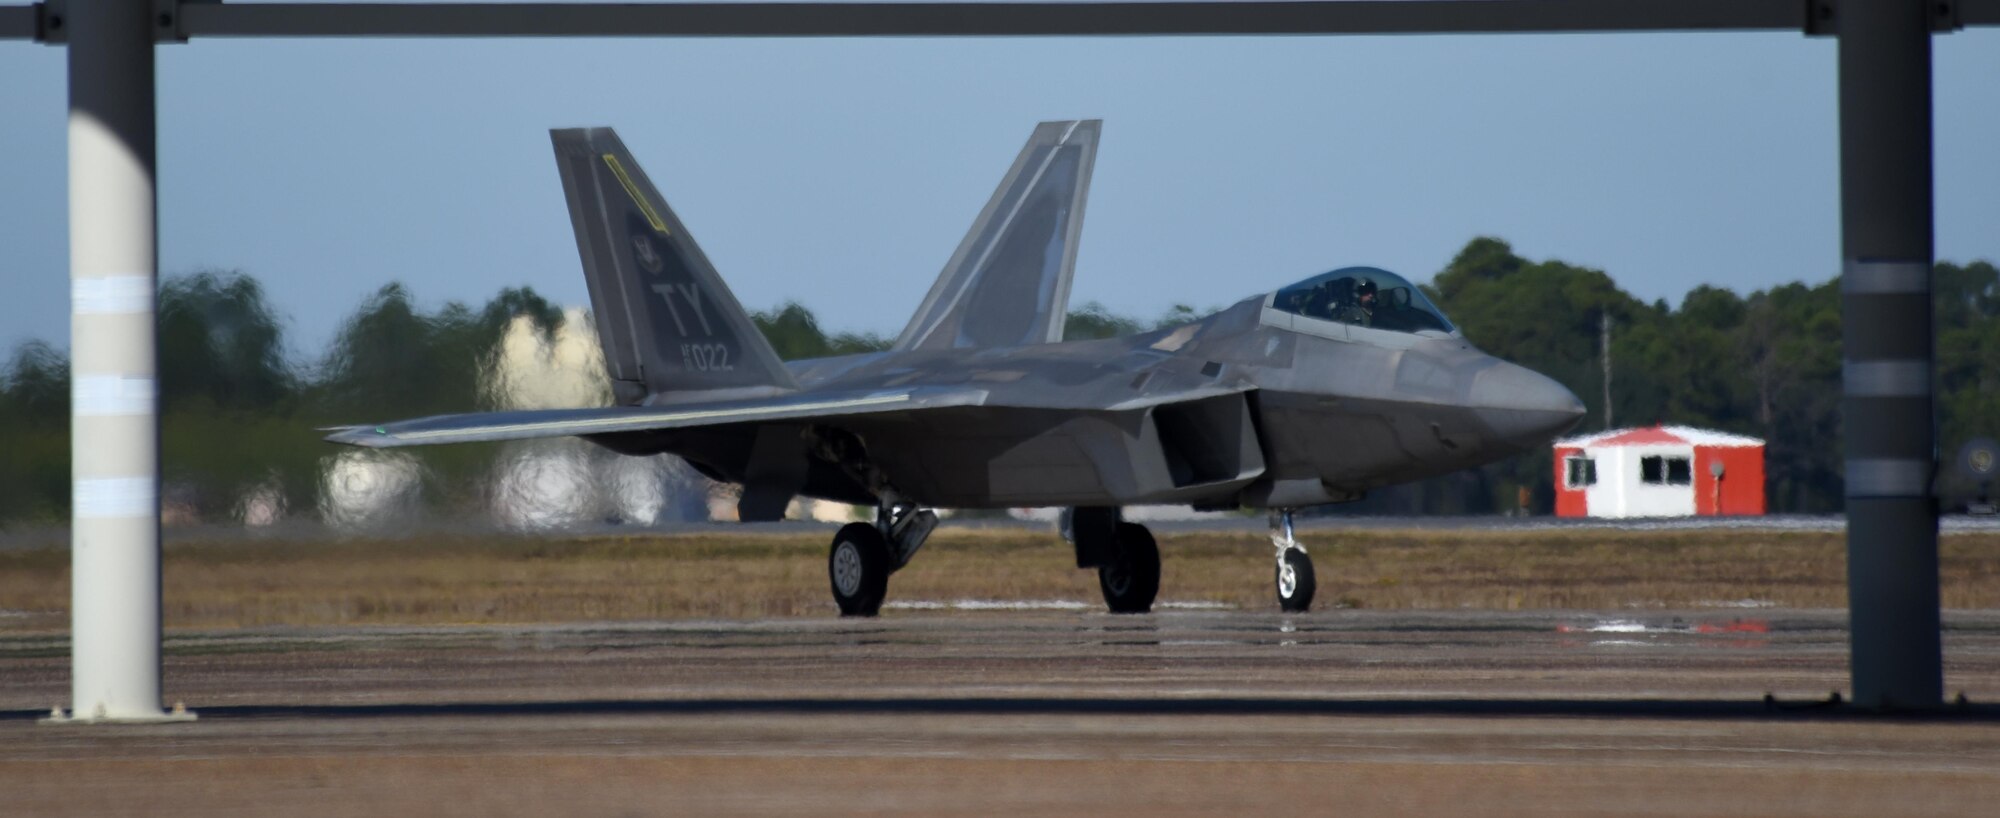 A U.S. Air Force F-22 Raptor from Tyndall Air Force Base, Fla., taxies down the flightline at Tyndall during Checkered Flag 17-1 Dec. 14, 2016. The 325th Fighter Wing hosted more than 90 aircraft and over 800 Airmen during Checkered Flag 17-1, a large-scale aerial total force integration exercise. (U.S. Air Force photo by Senior Airman Solomon Cook/Released)